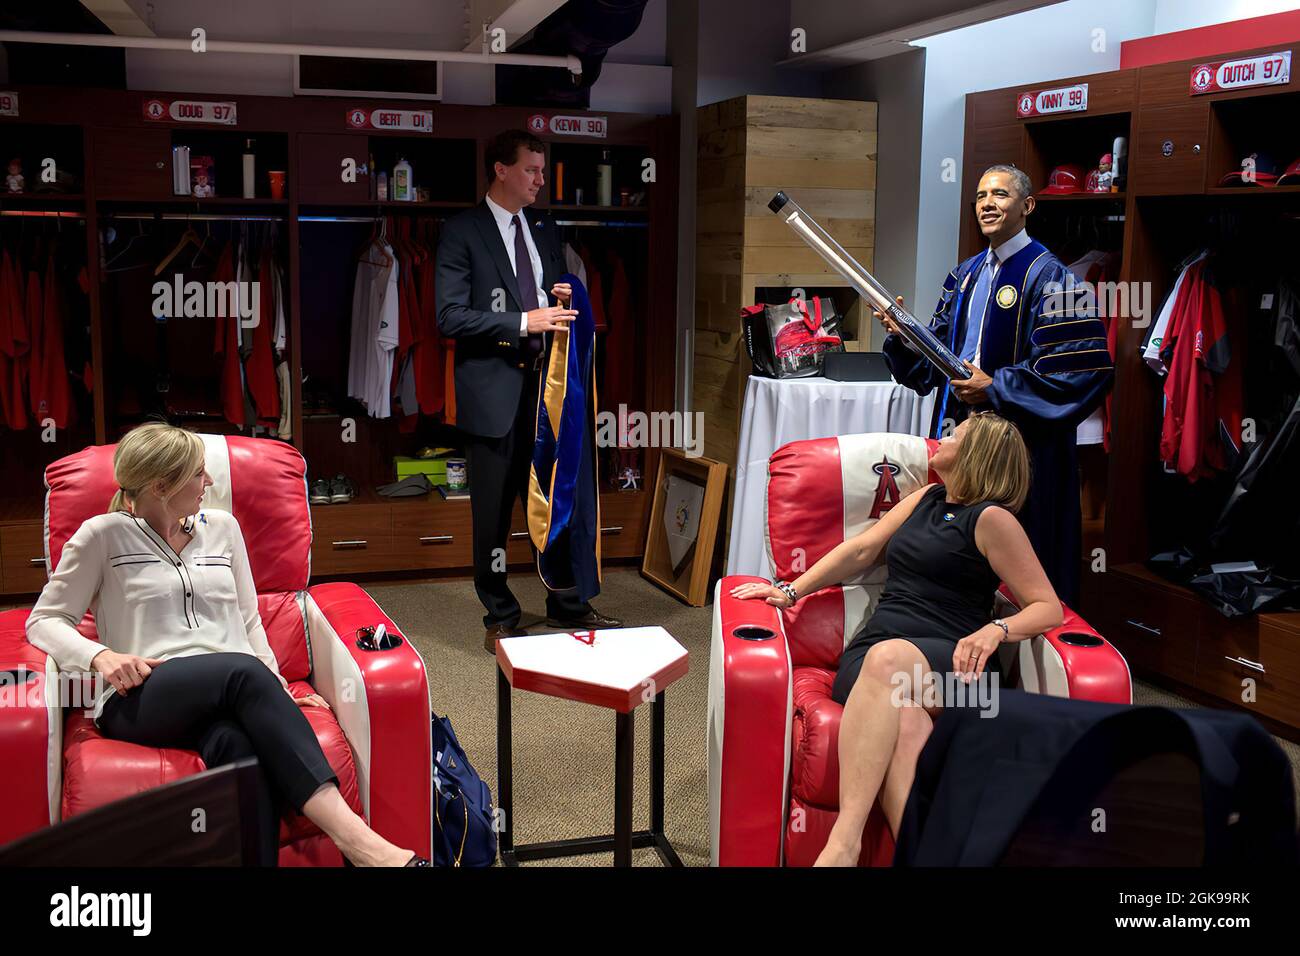 President Barack Obama holds a baseball bat  and jokes with staff in the locker room prior to the University of California, Irvine commencement ceremony at Angels Stadium of Anaheim in Anaheim, Calif., Saturday, June 14, 2014. From left are: Anita Decker Breckenridge, Deputy Chief of Staff for Operations, Trip Director Marvin Nicholson and Jennifer Palmieri, Director of Communications. (Official White House Photo by Pete Souza) This official White House photograph is being made available only for publication by news organizations and/or for personal use printing by the subject(s) of the photog Stock Photo